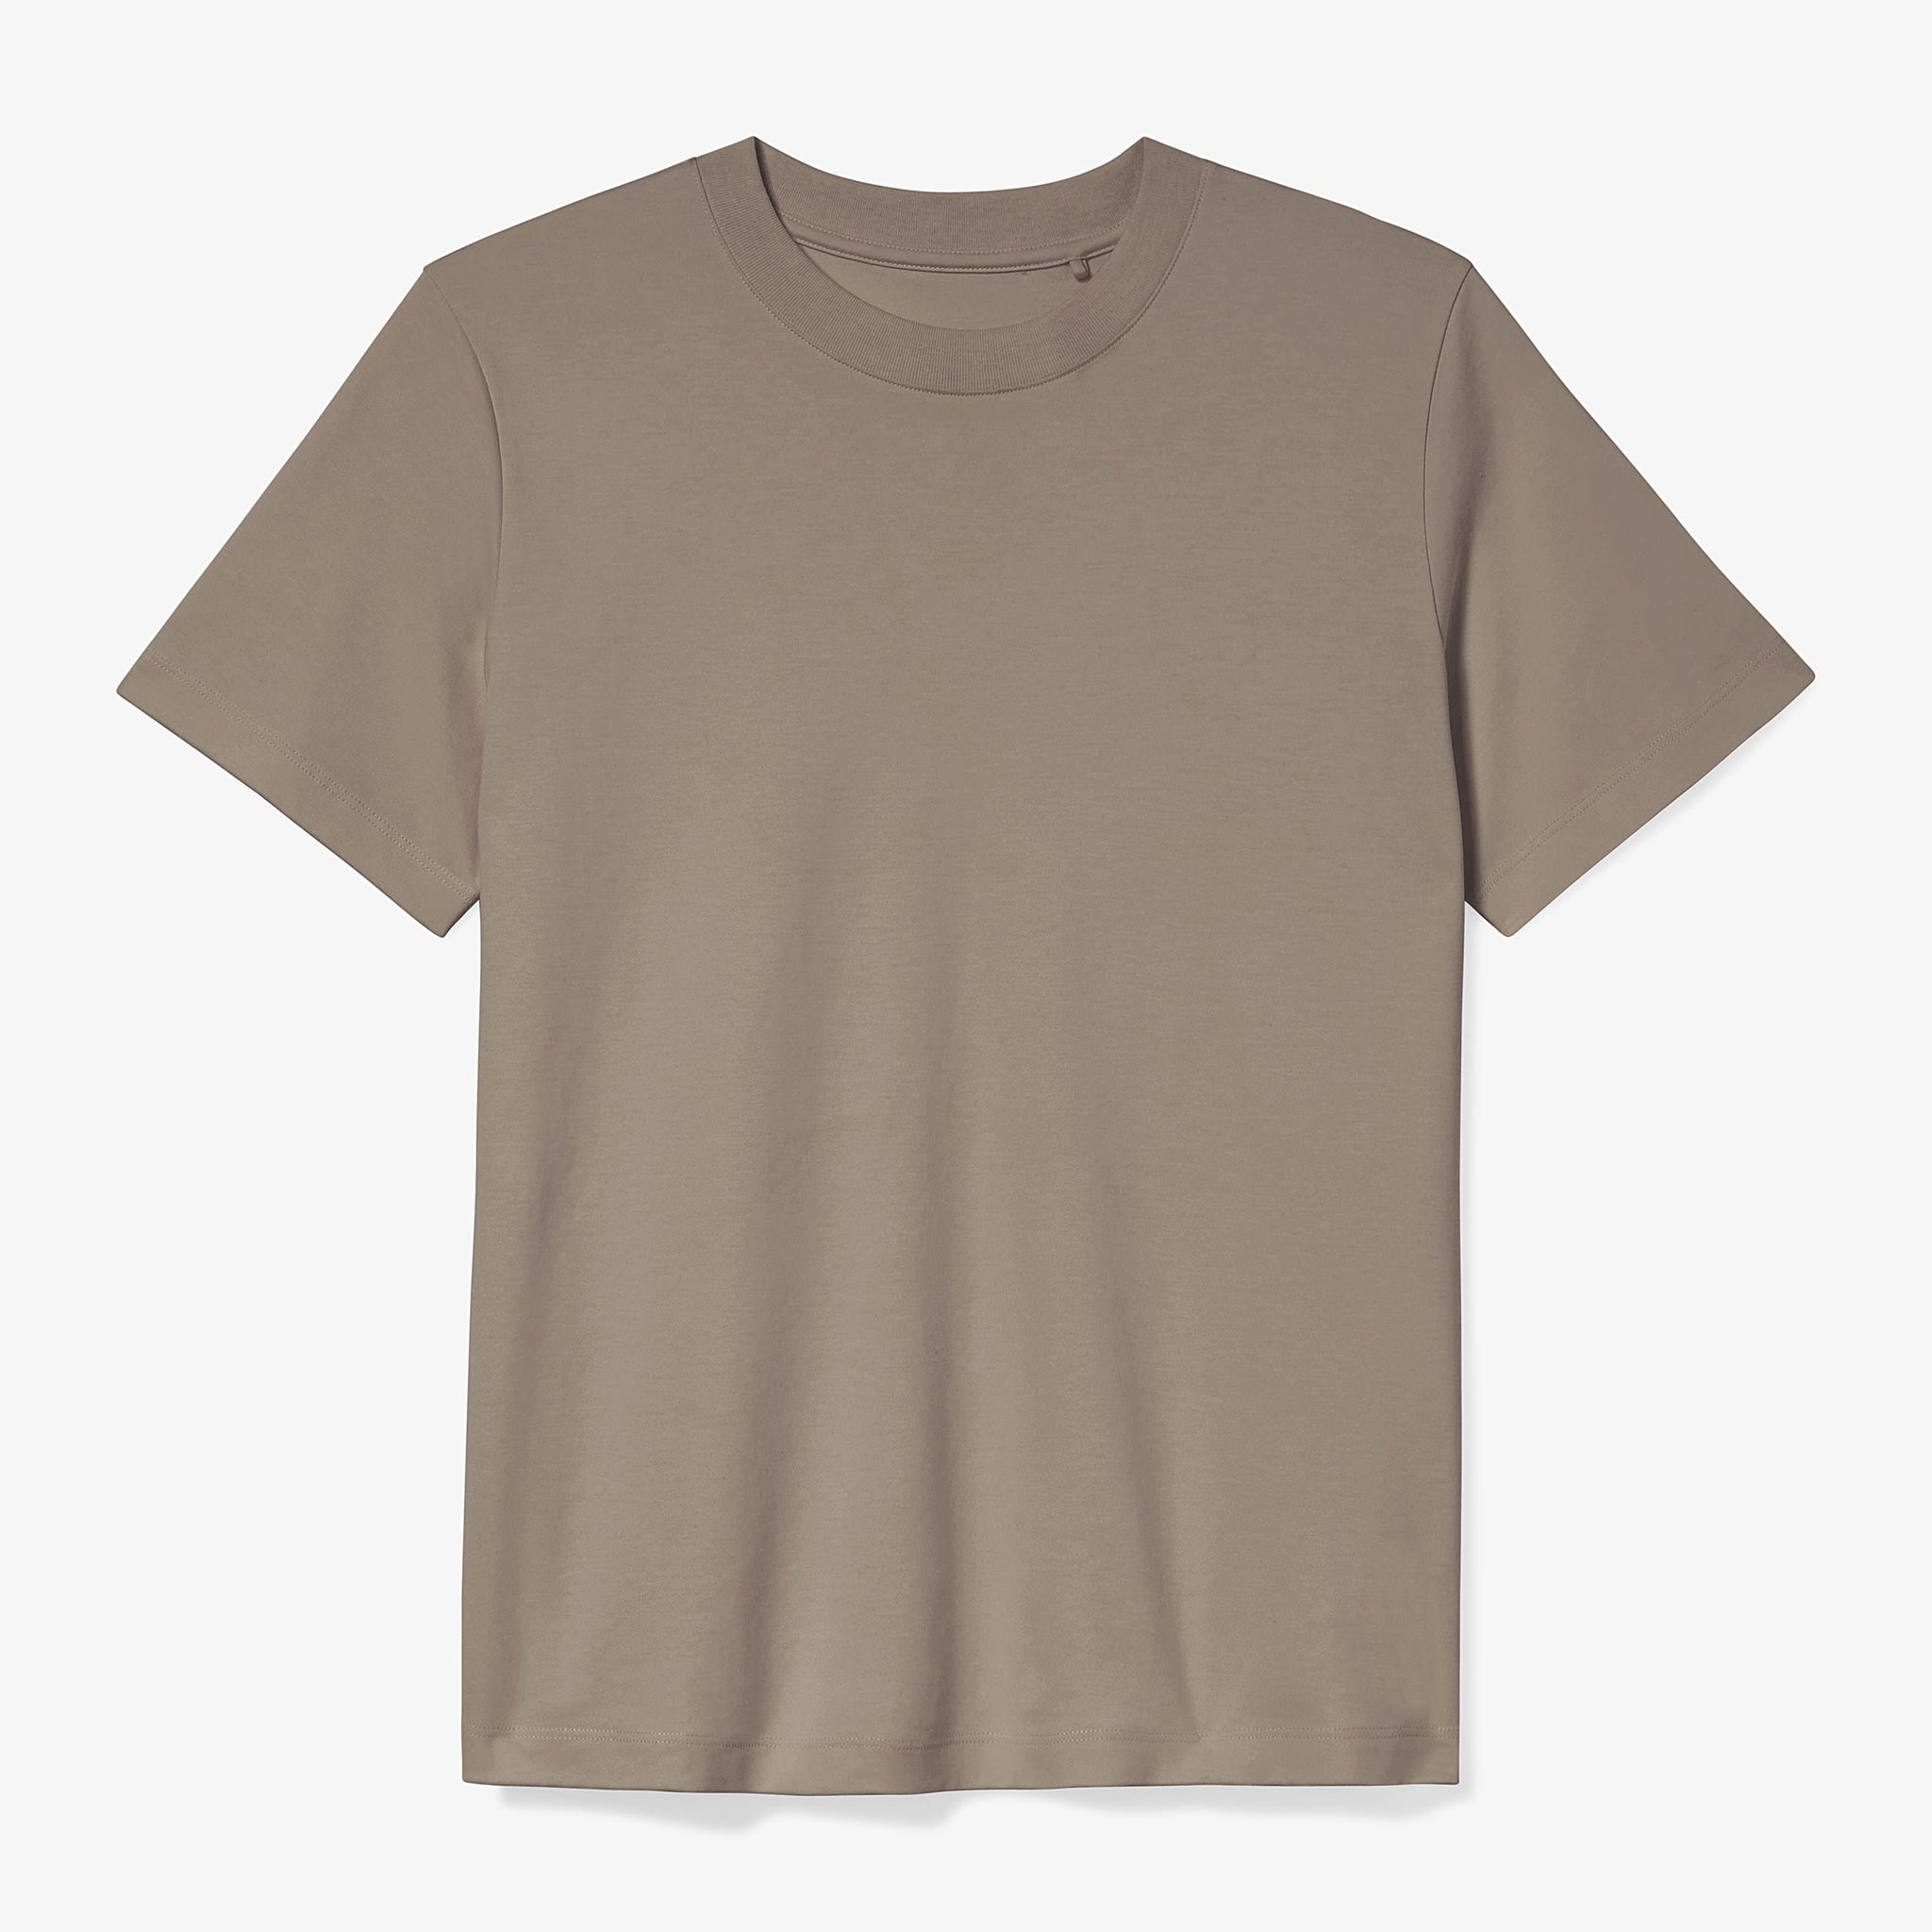 Packshot image of the Leslie T-Shirt—Compact Cotton in Pebble